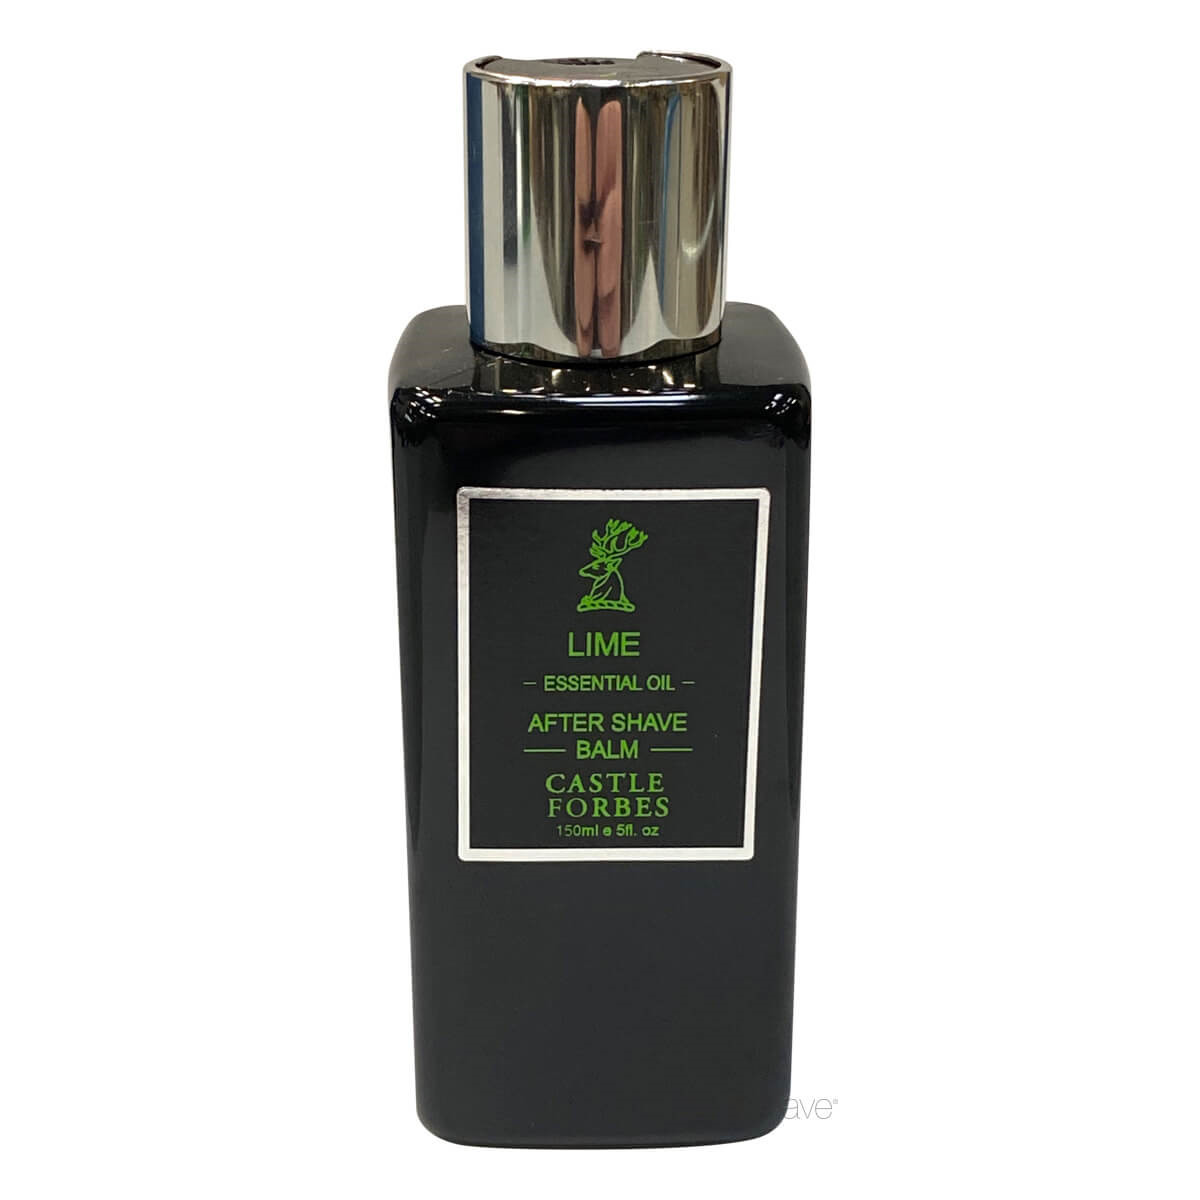 Castle Forbes Aftershave Balm, Lime Essential Oil, 150 ml.